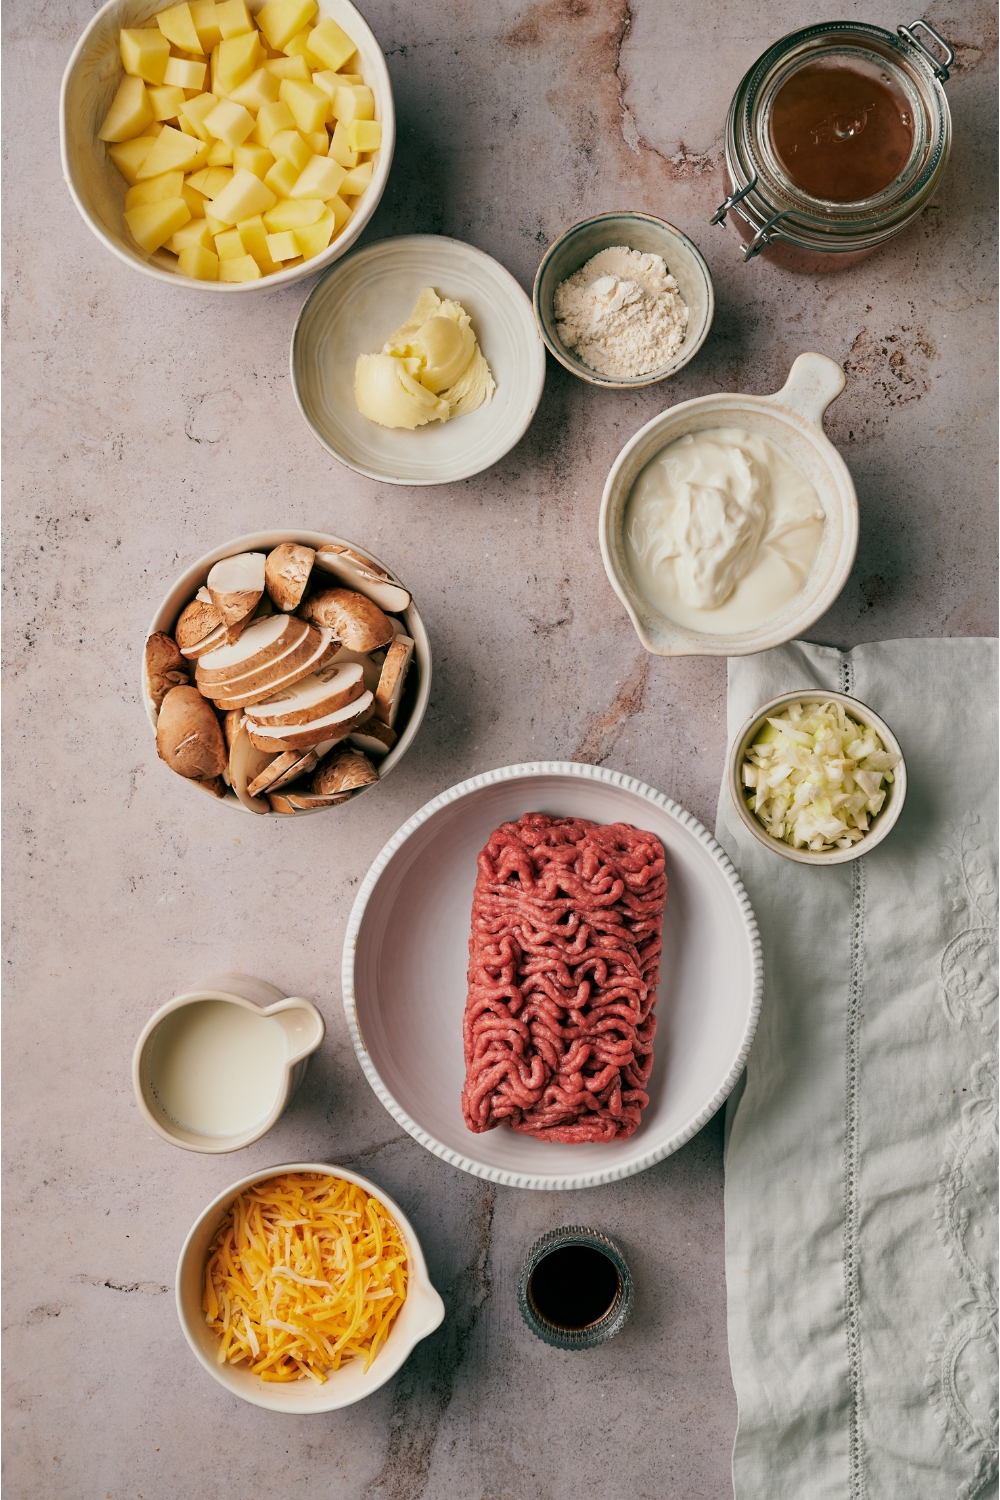 An assortment of ingredients including bowls of diced potatoes, raw ground beef, sliced mushrooms, sour cream, butter, cheese, diced onion, and a jar of beef broth.